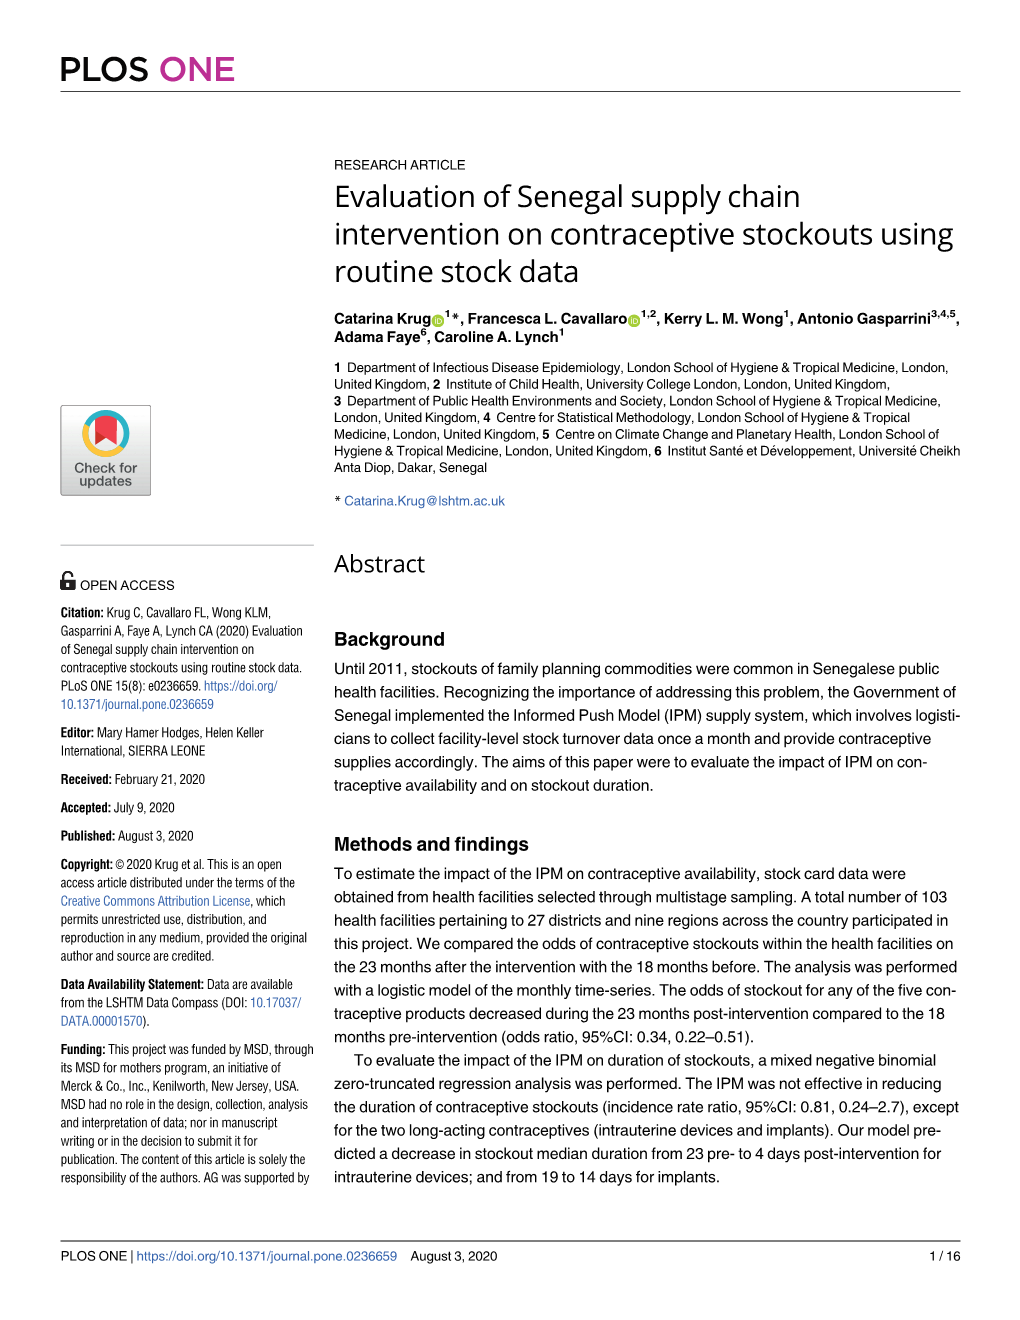 Evaluation of Senegal Supply Chain Intervention on Contraceptive Stockouts Using Routine Stock Data